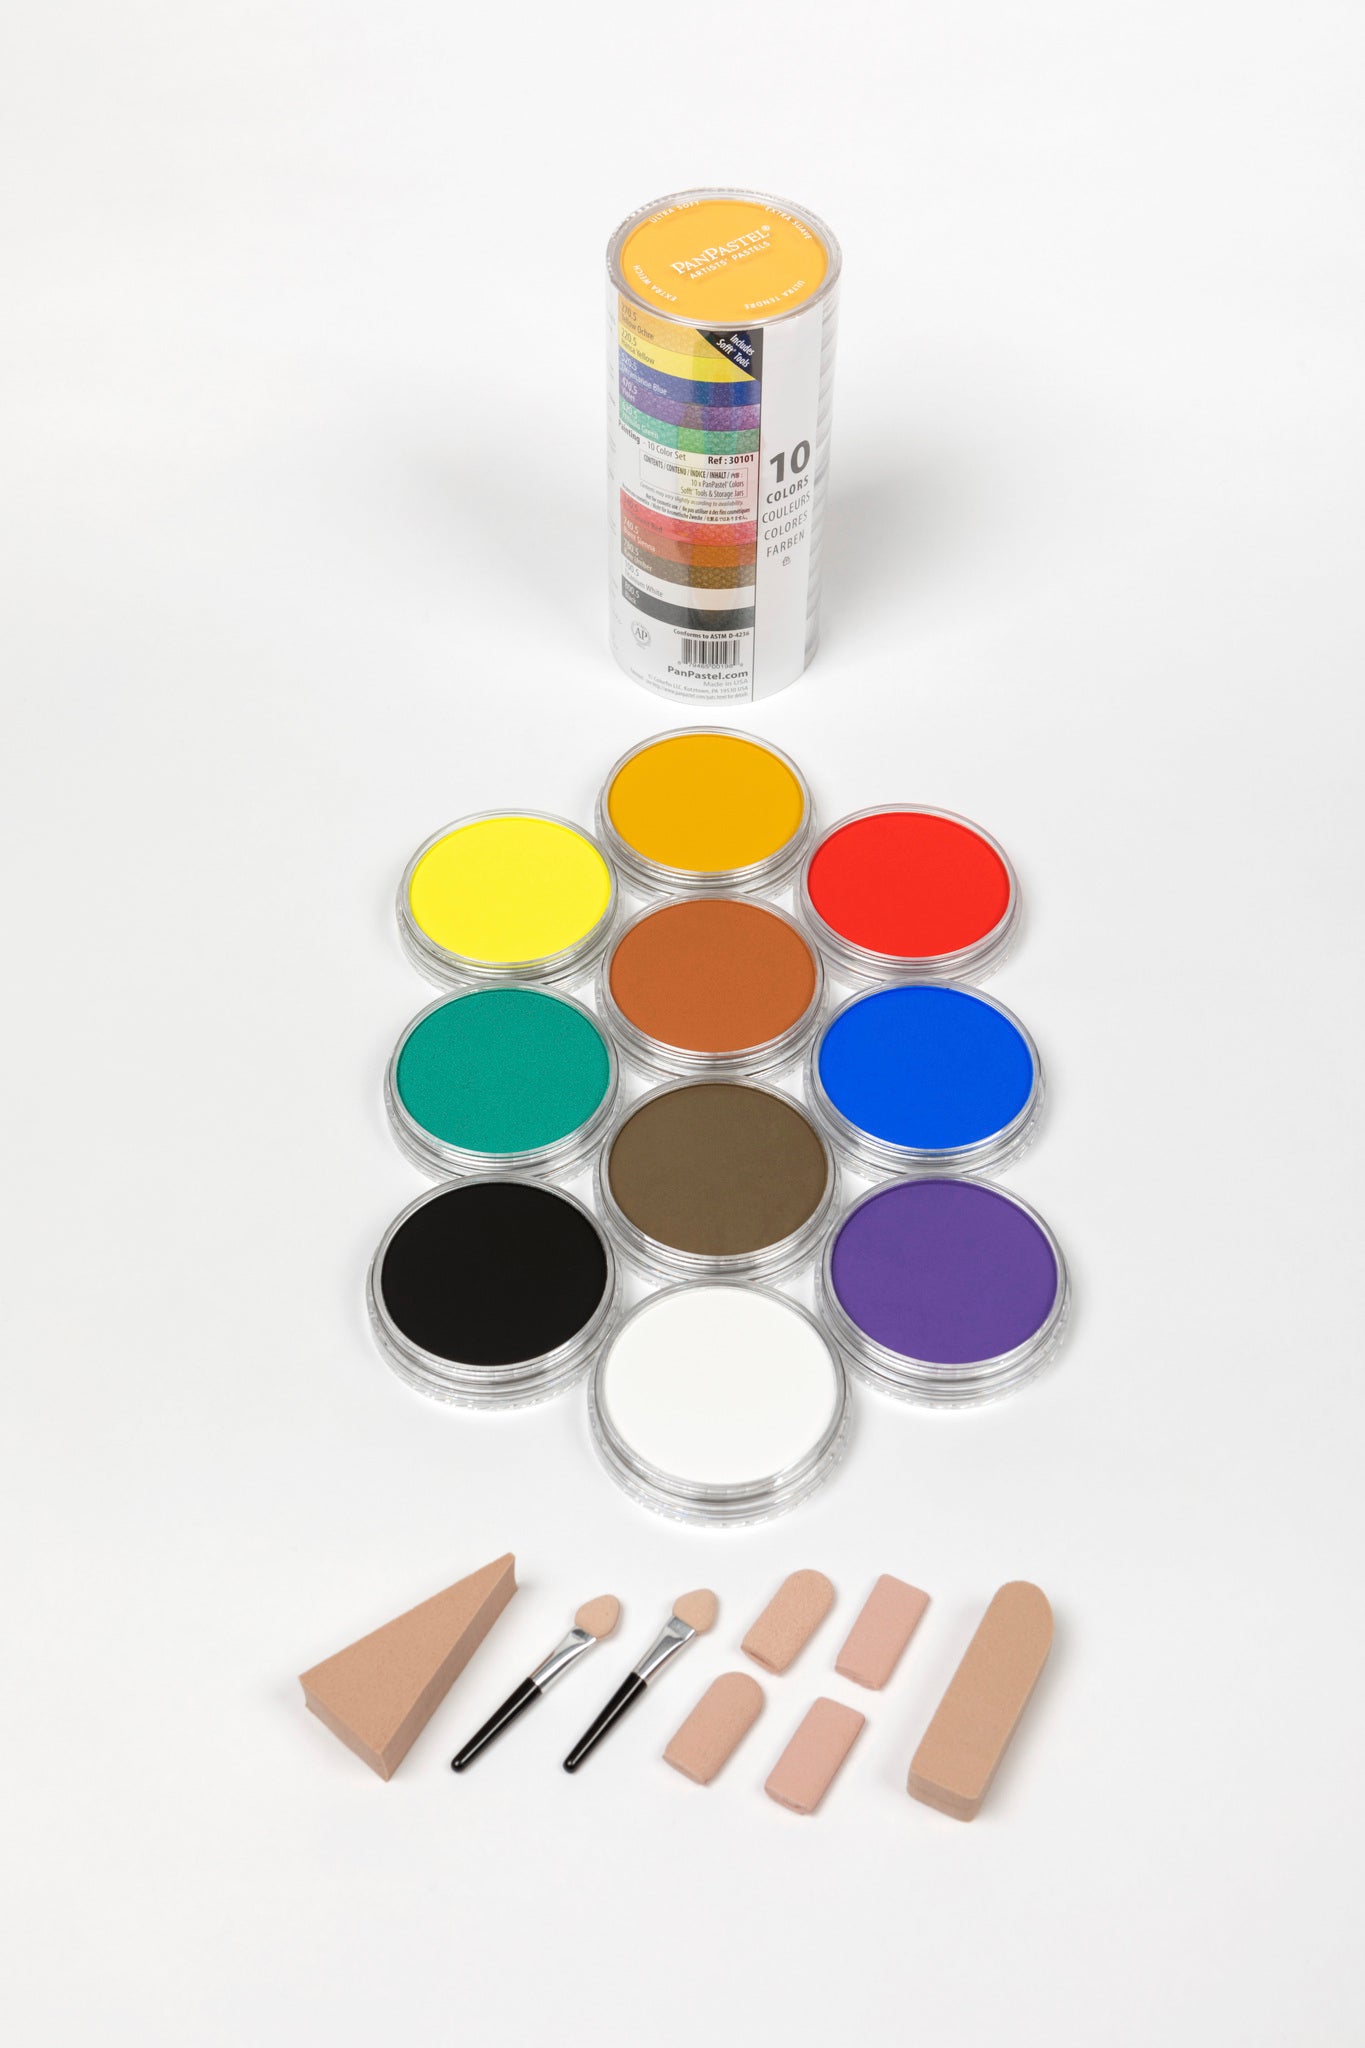 PanPastel 10 Colour Painting set 30101 & Sofft Tools, this is a great colour combination set, includes essential primary colours, plus black and white for tinting and tone, as well as a selection of complementary colours that work well for all subjects and backgrounds